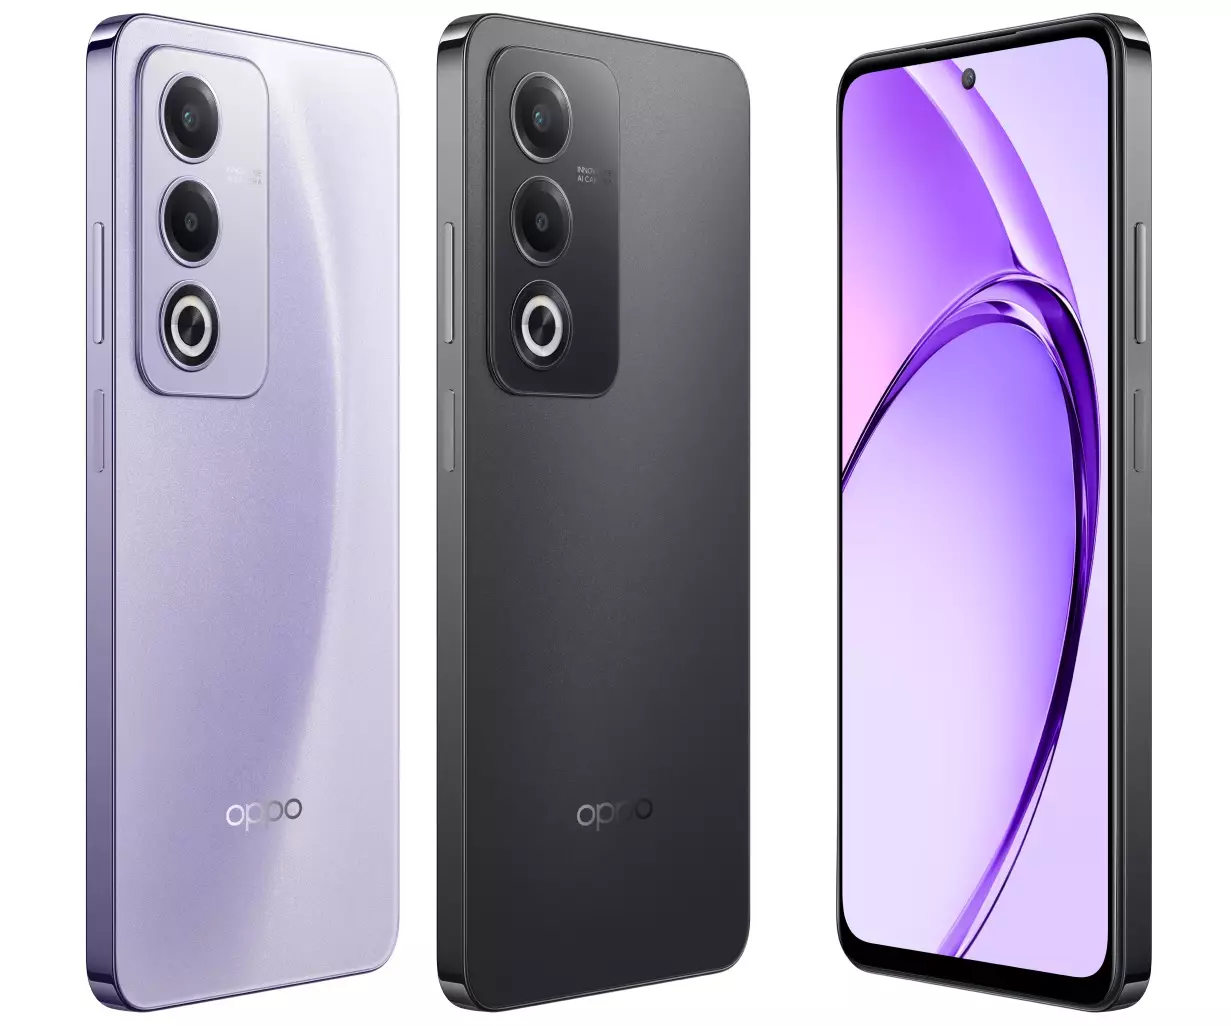 OPPO A3 Pro 5G colors India.